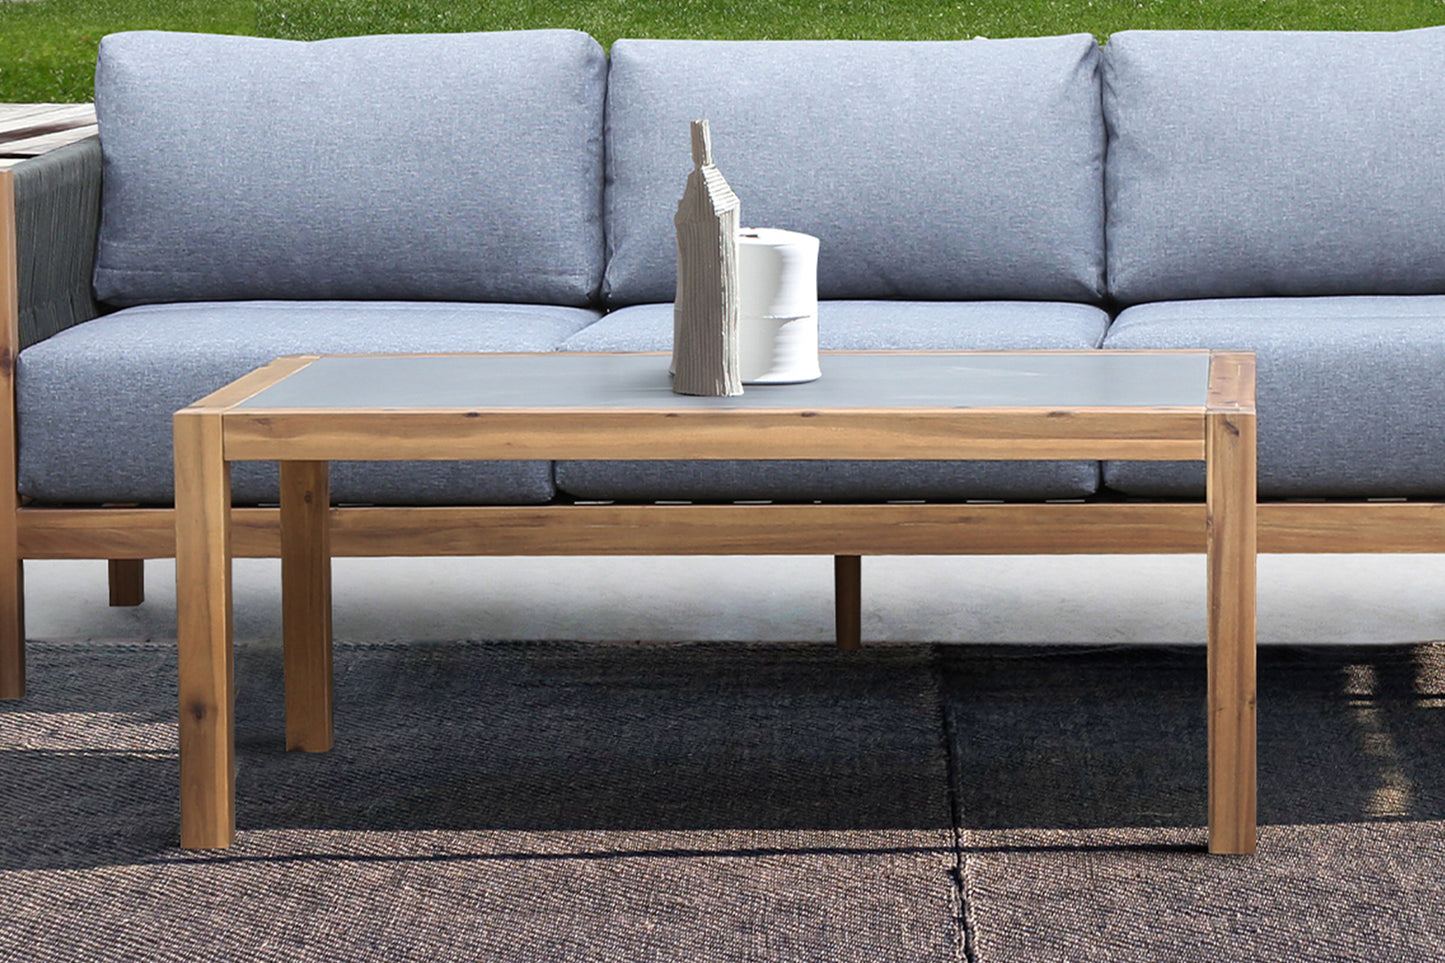 Sienna Outdoor Coffee Table with Teak Finish and Stone Top